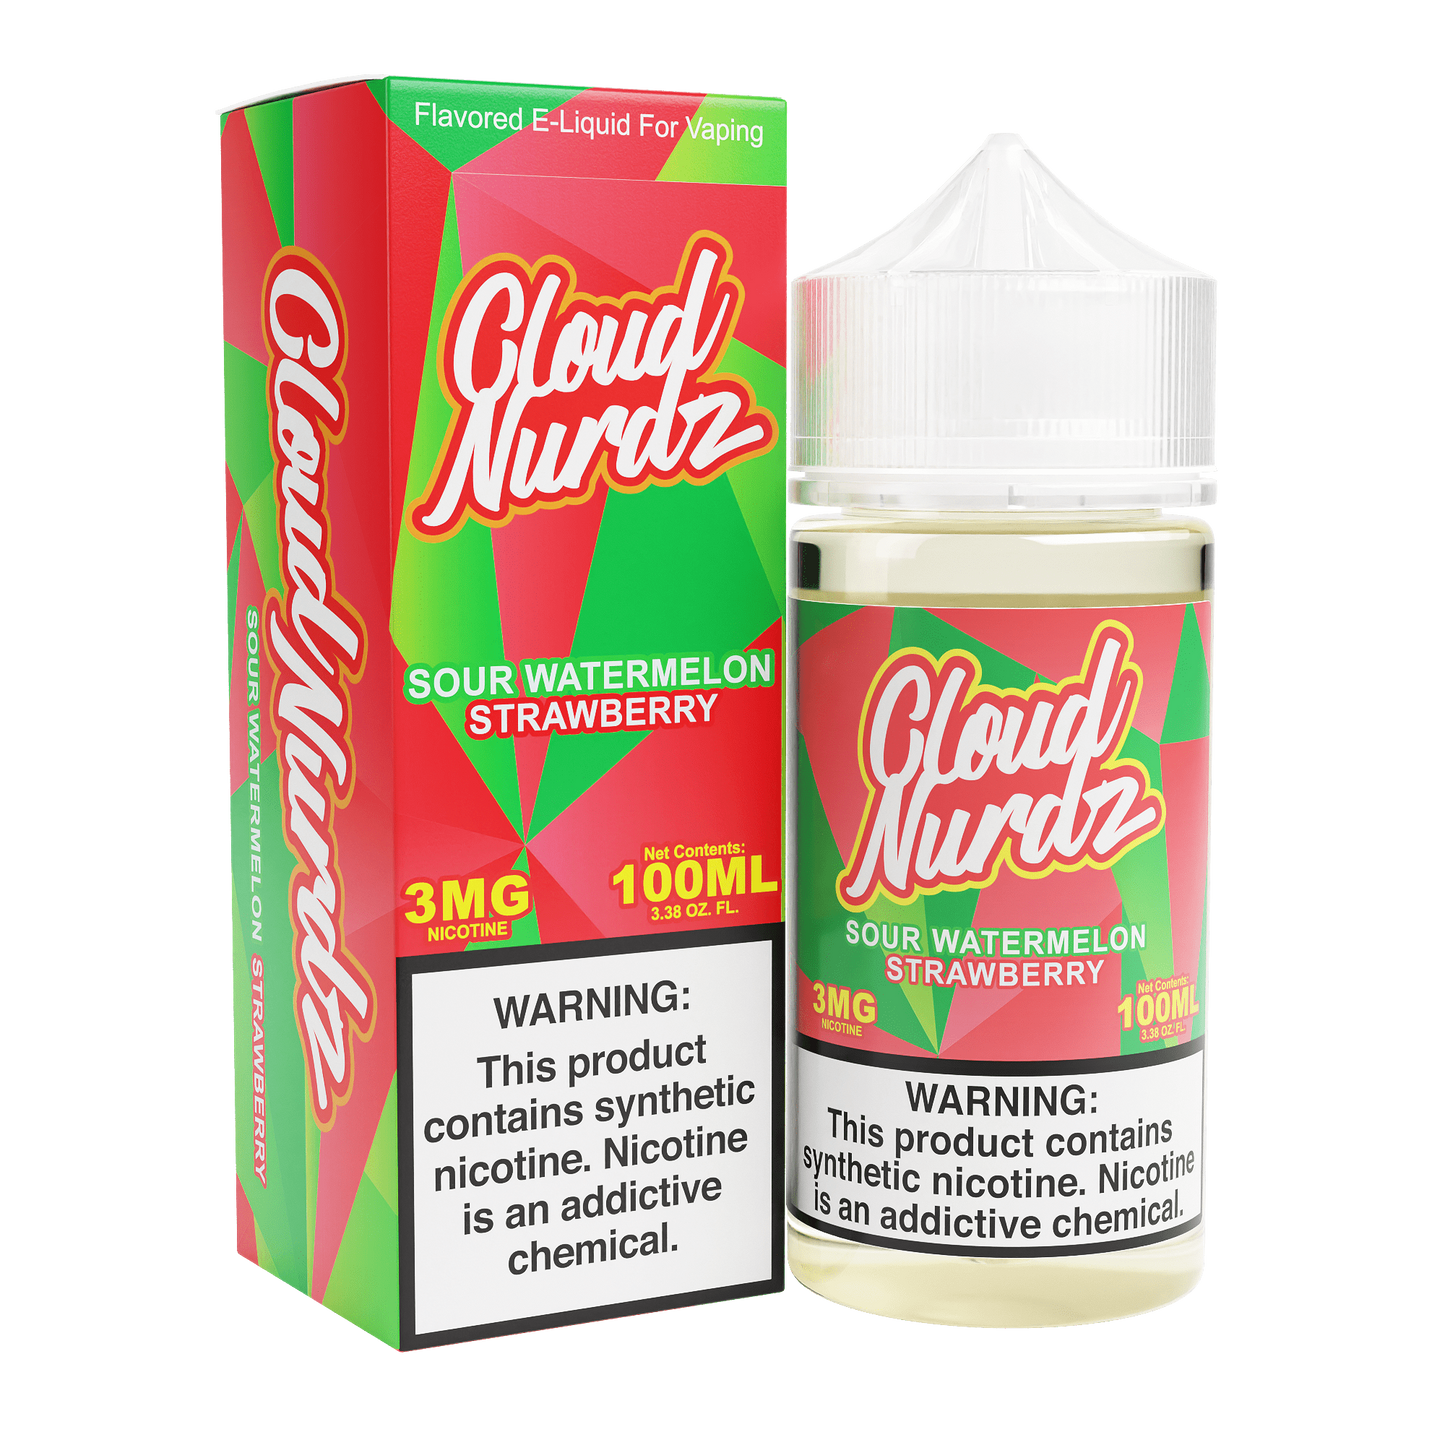 Sour Watermelon Strawberry by Cloud Nurdz Series 100mL with Packaging